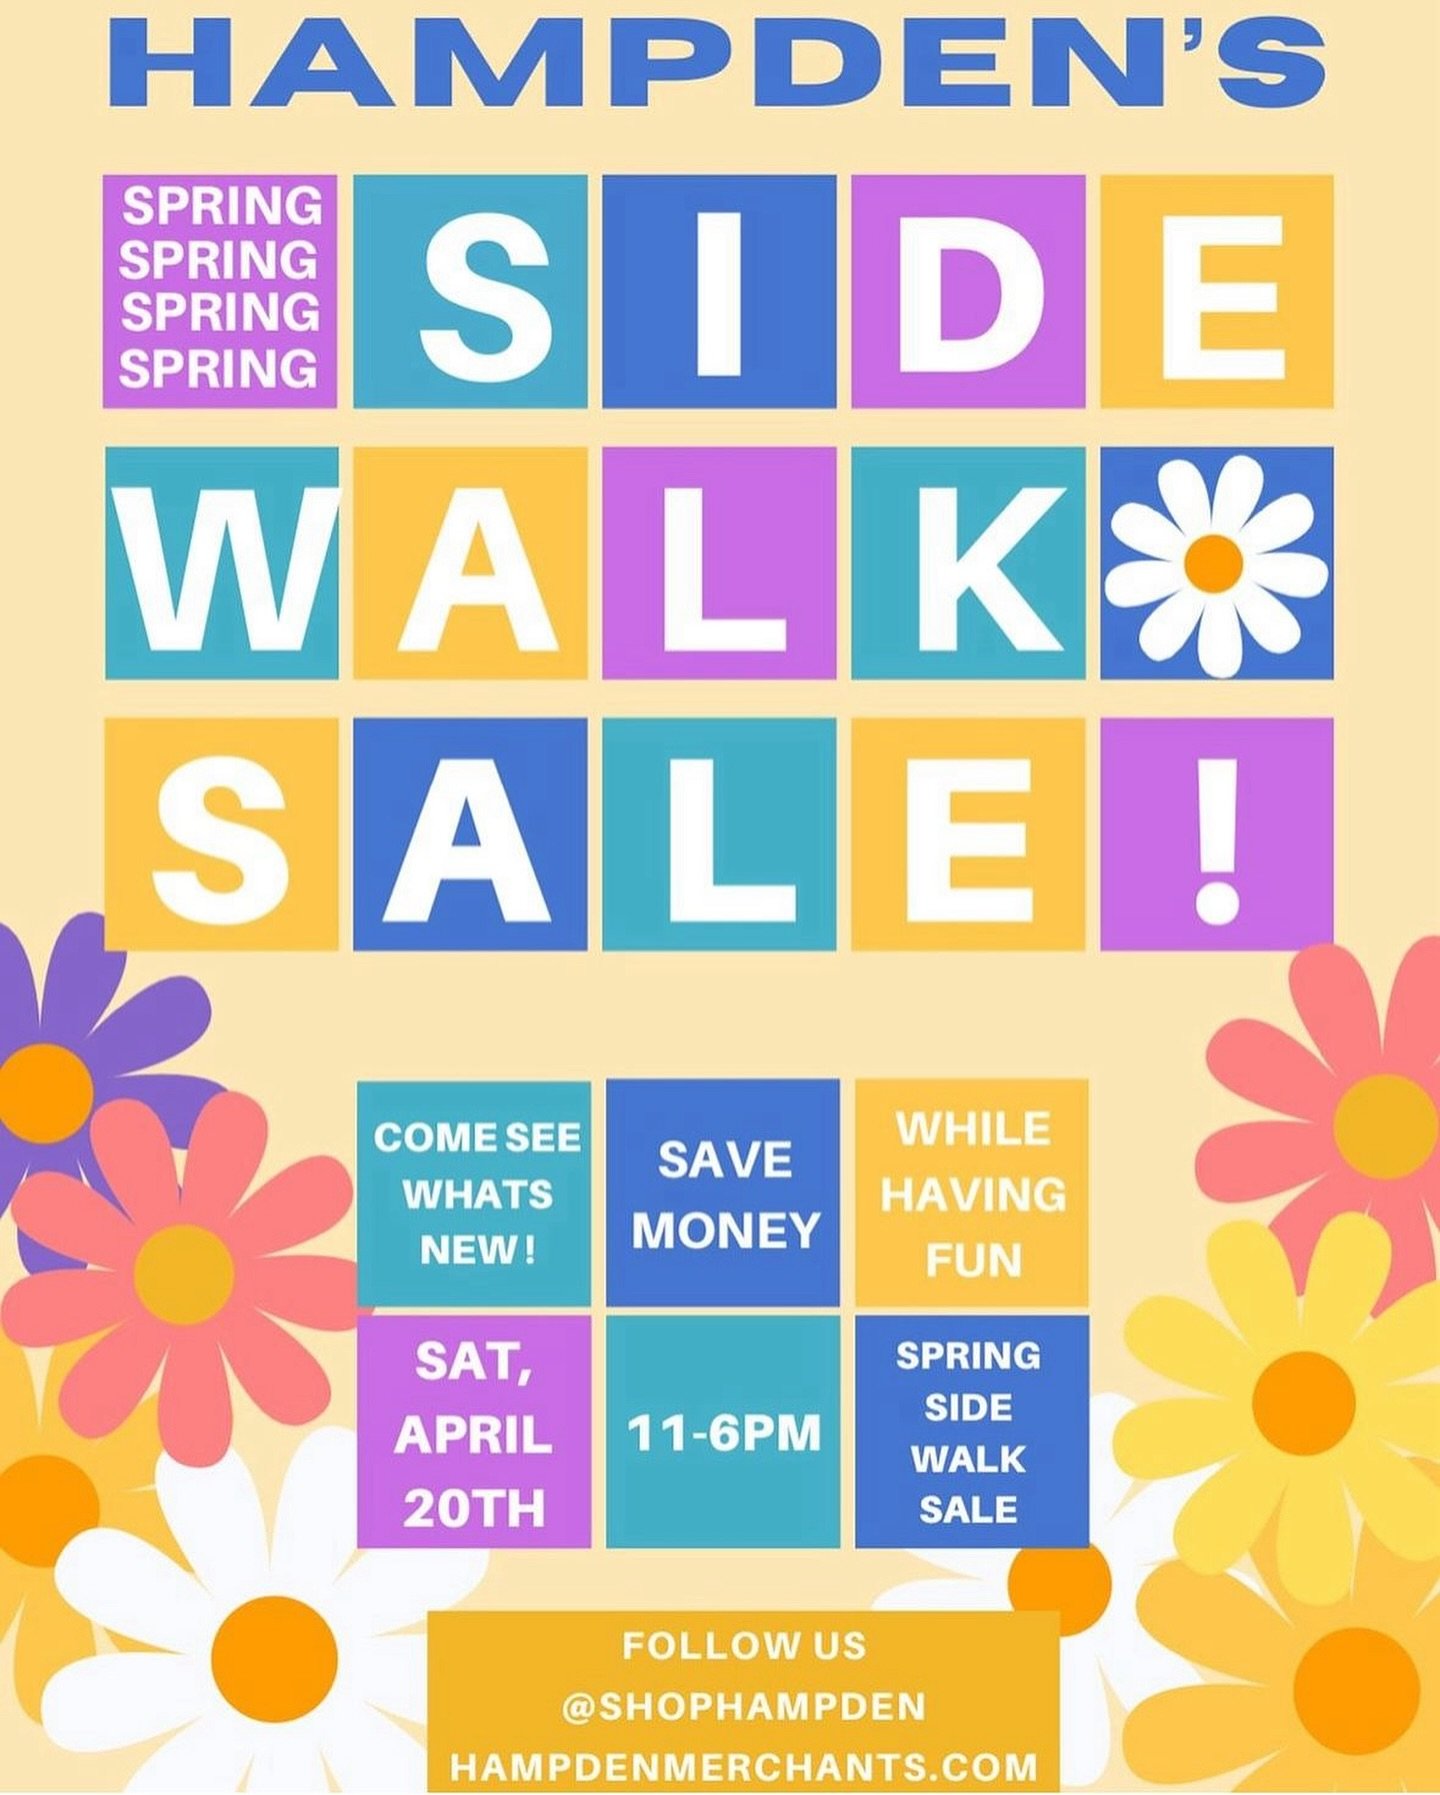 Get excited, Baltimore!!! TODAY&rsquo;S THE DAY, our Annual Hampden Spring Sidewalk Sale is back! 🛍️ 🍷😍 

Browse new spring looks, enjoy a bite at one of Hampden&rsquo;s eateries, and have a fabulous time along The Avenue. See you in Hampden on fa